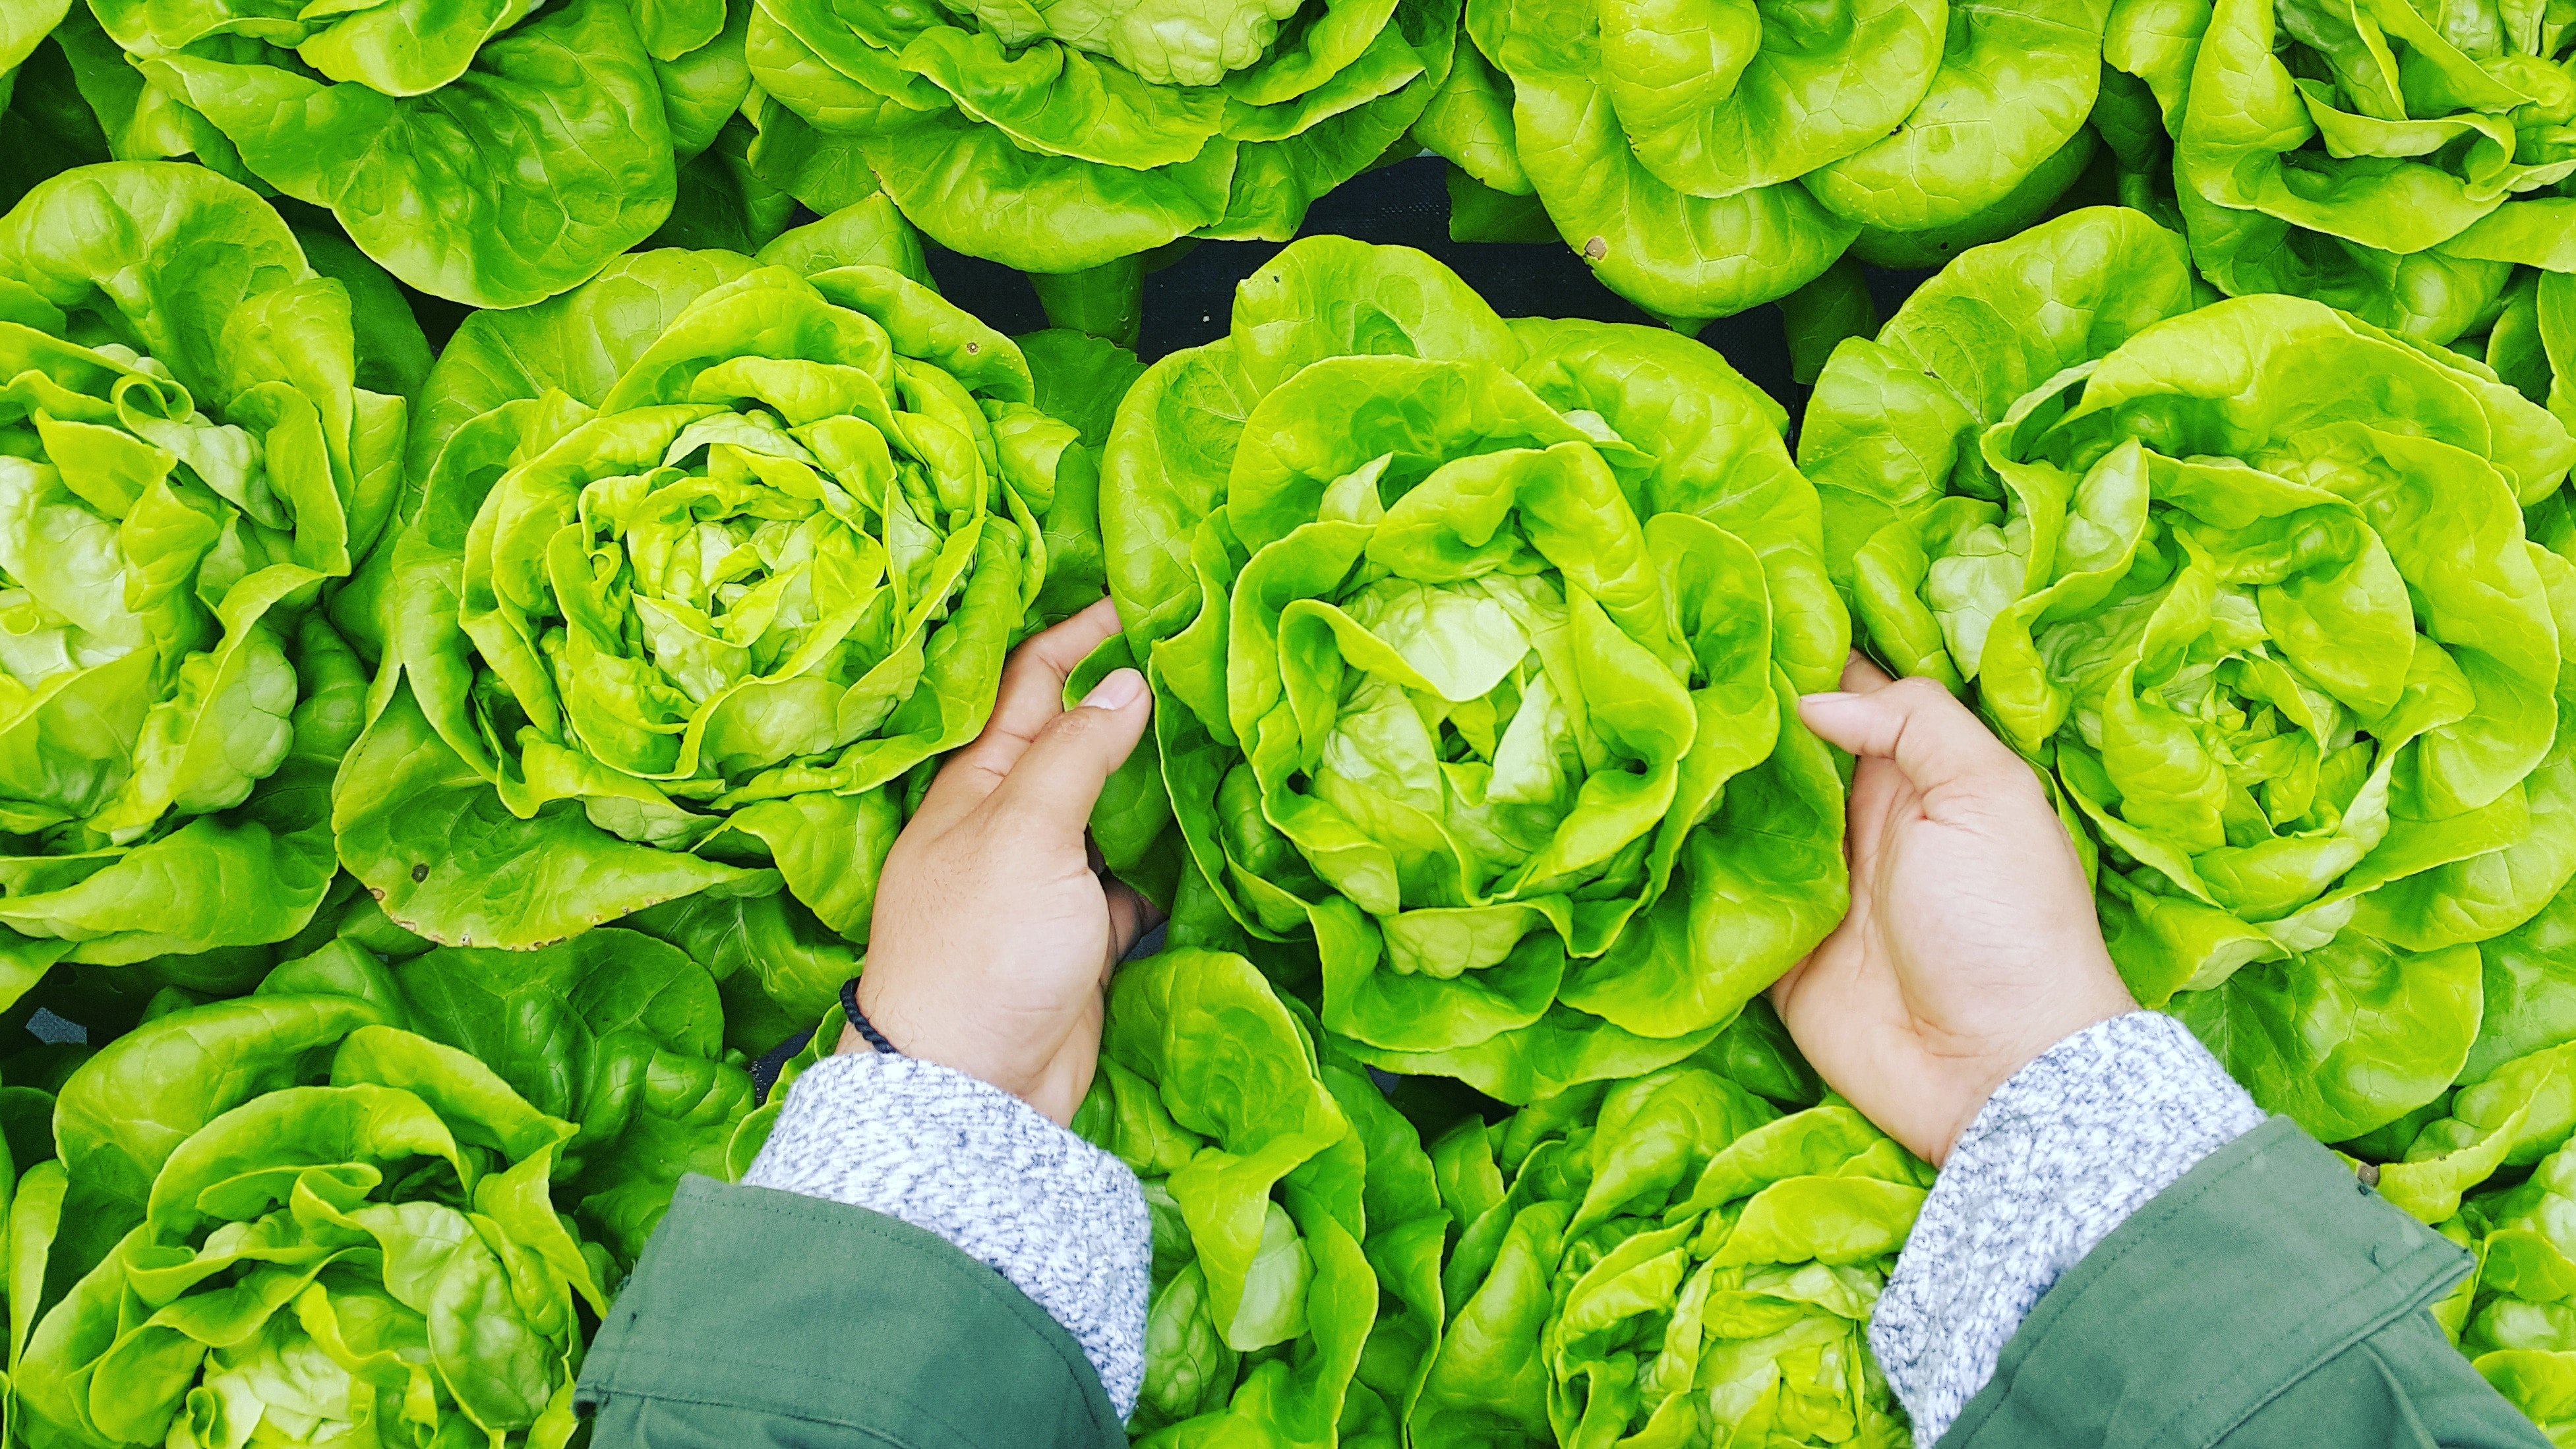 Bright green bibb lettuce with person's hands holding one head of lettuce.